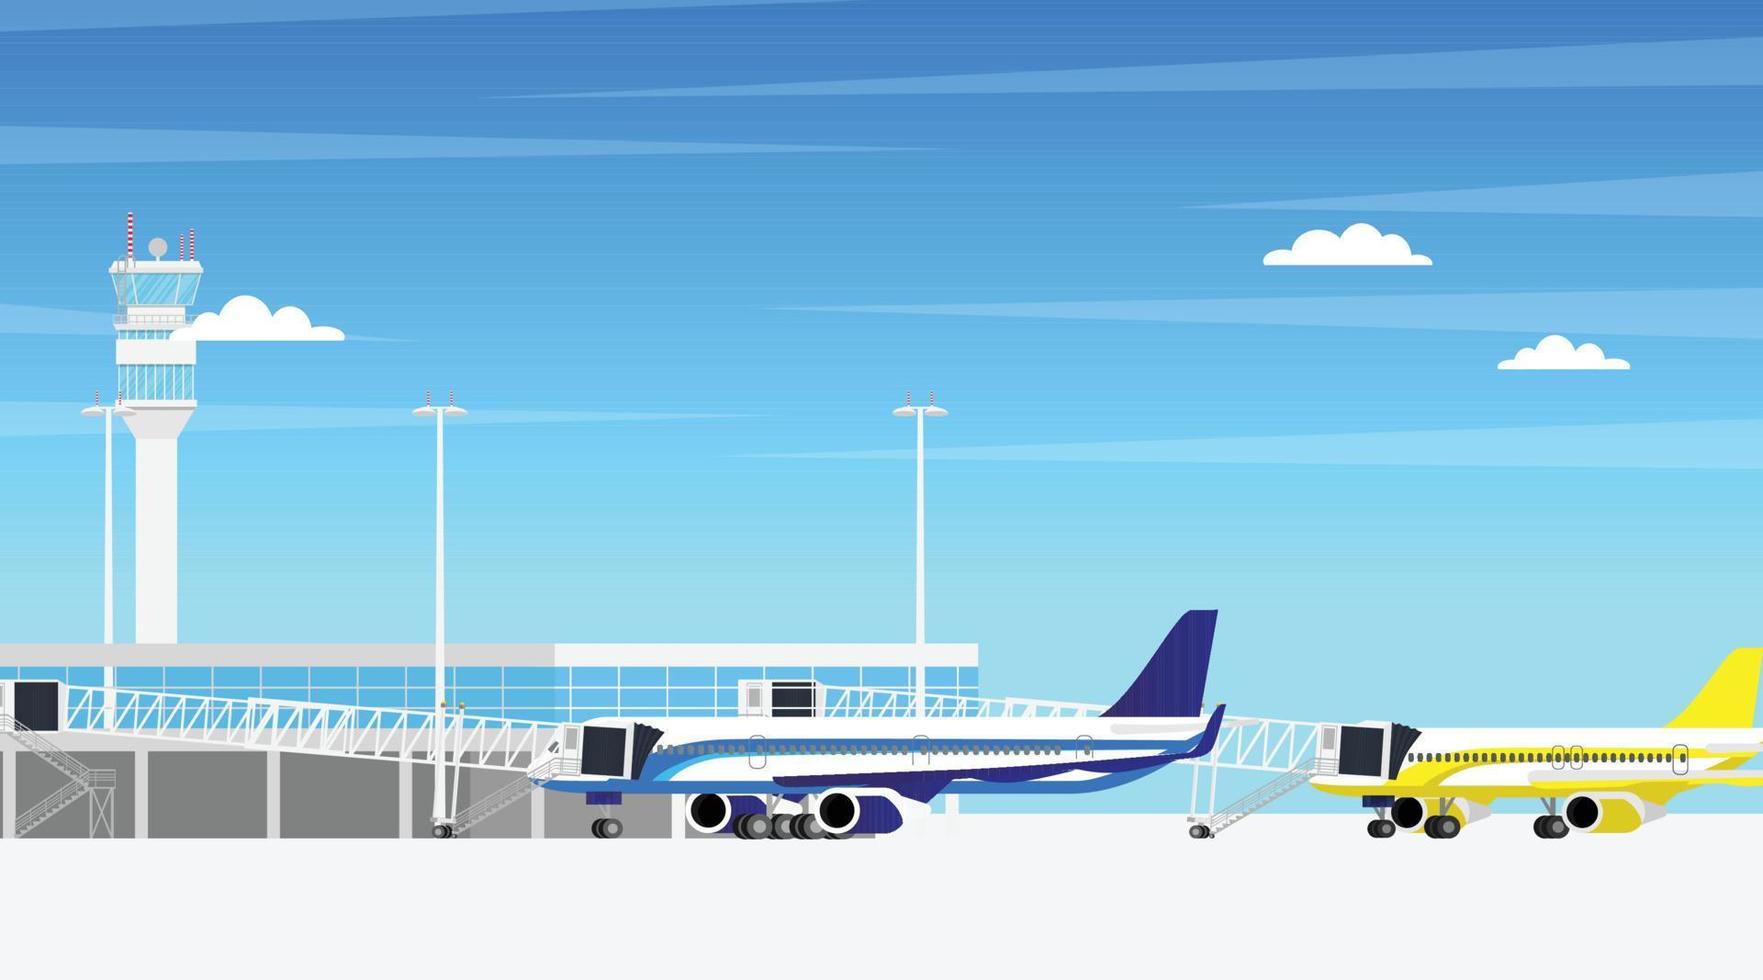 airport airfield terminal building with airplane aircraft parking at departure gate and aero path way bridge connected to airport terminal hall in minimal design vector